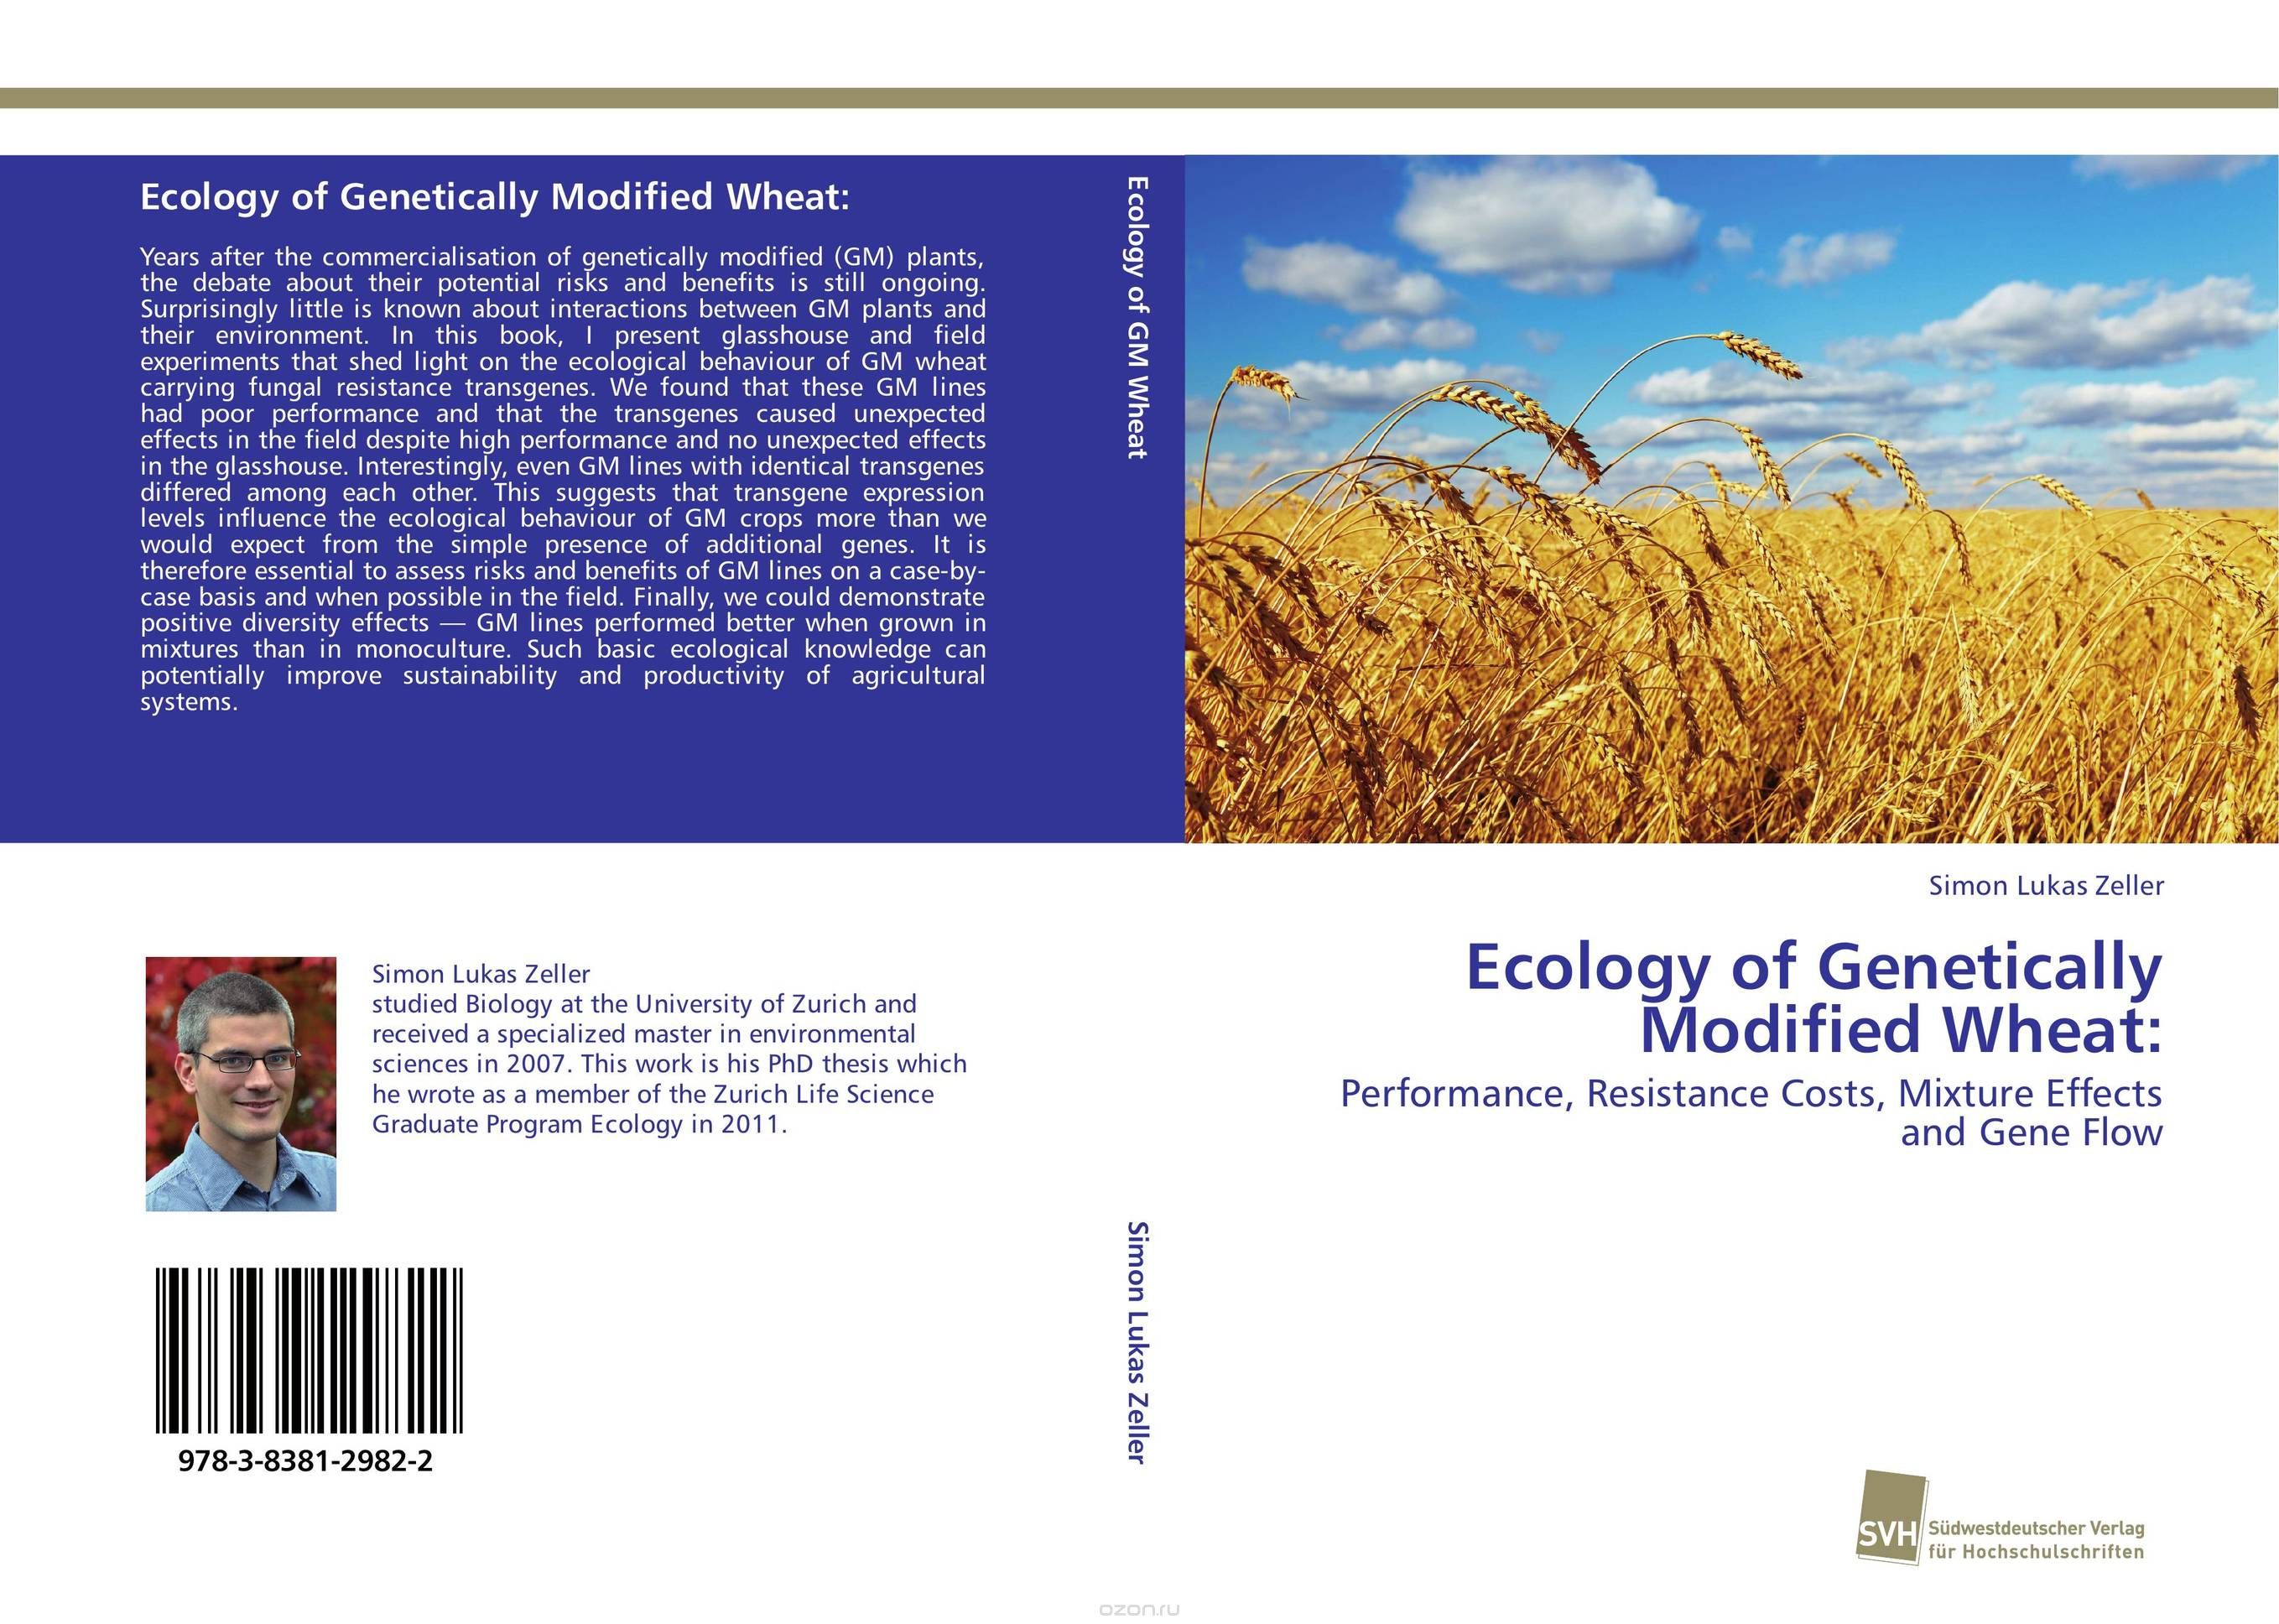 Ecology of Genetically Modified Wheat: